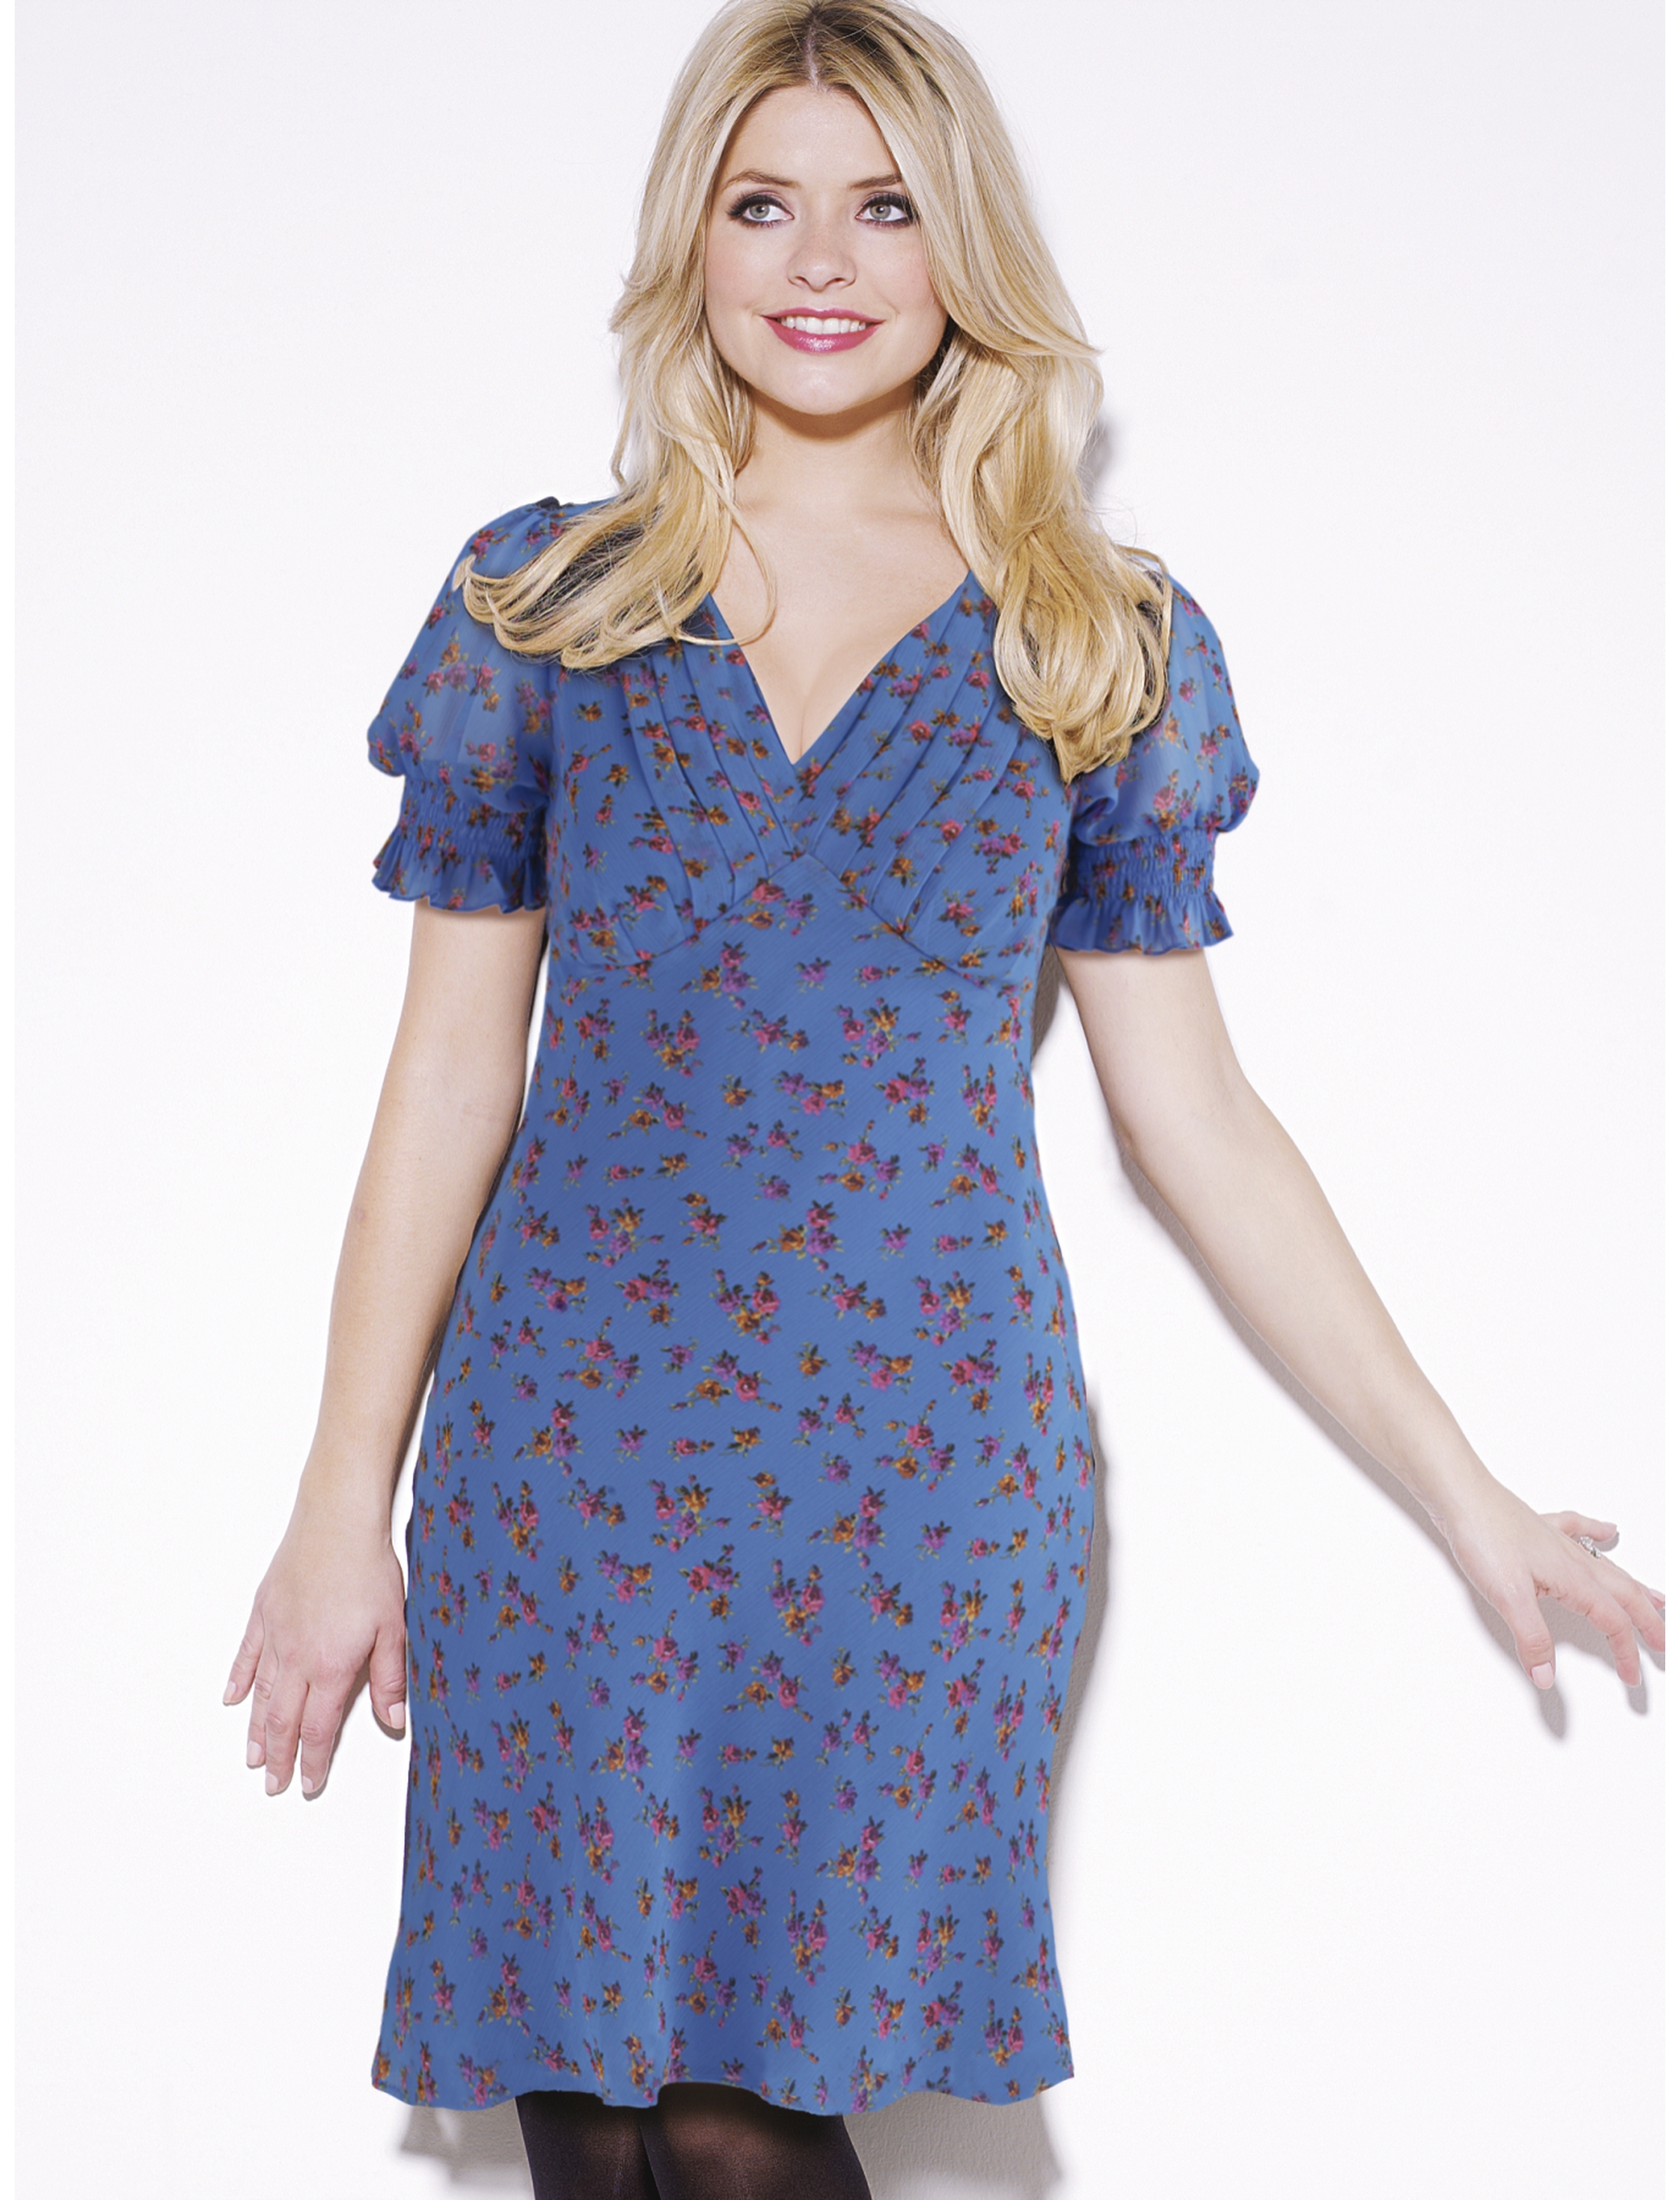 kaneda Holly Willoughby 2012 verycouk 22